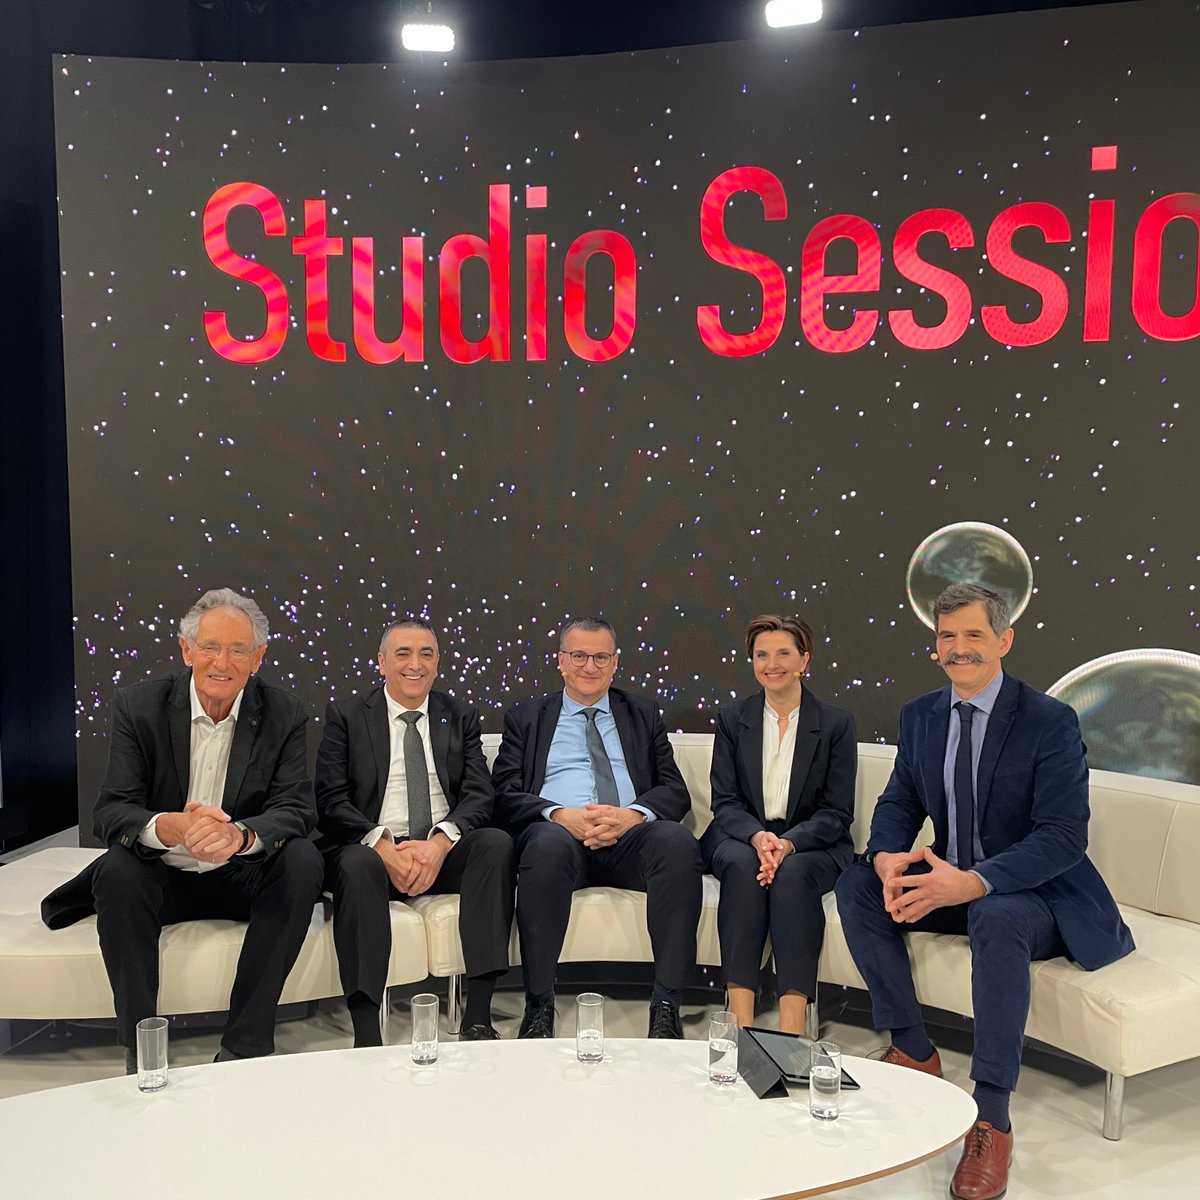 In case you missed it at #ECR2024 you can still watch the EuroSafe Imaging studio session on-demand for free, where we take a look back at some of our successes over the past decade as well as discussing current initiatives: connect.myesr.org/?esrc_course=e…